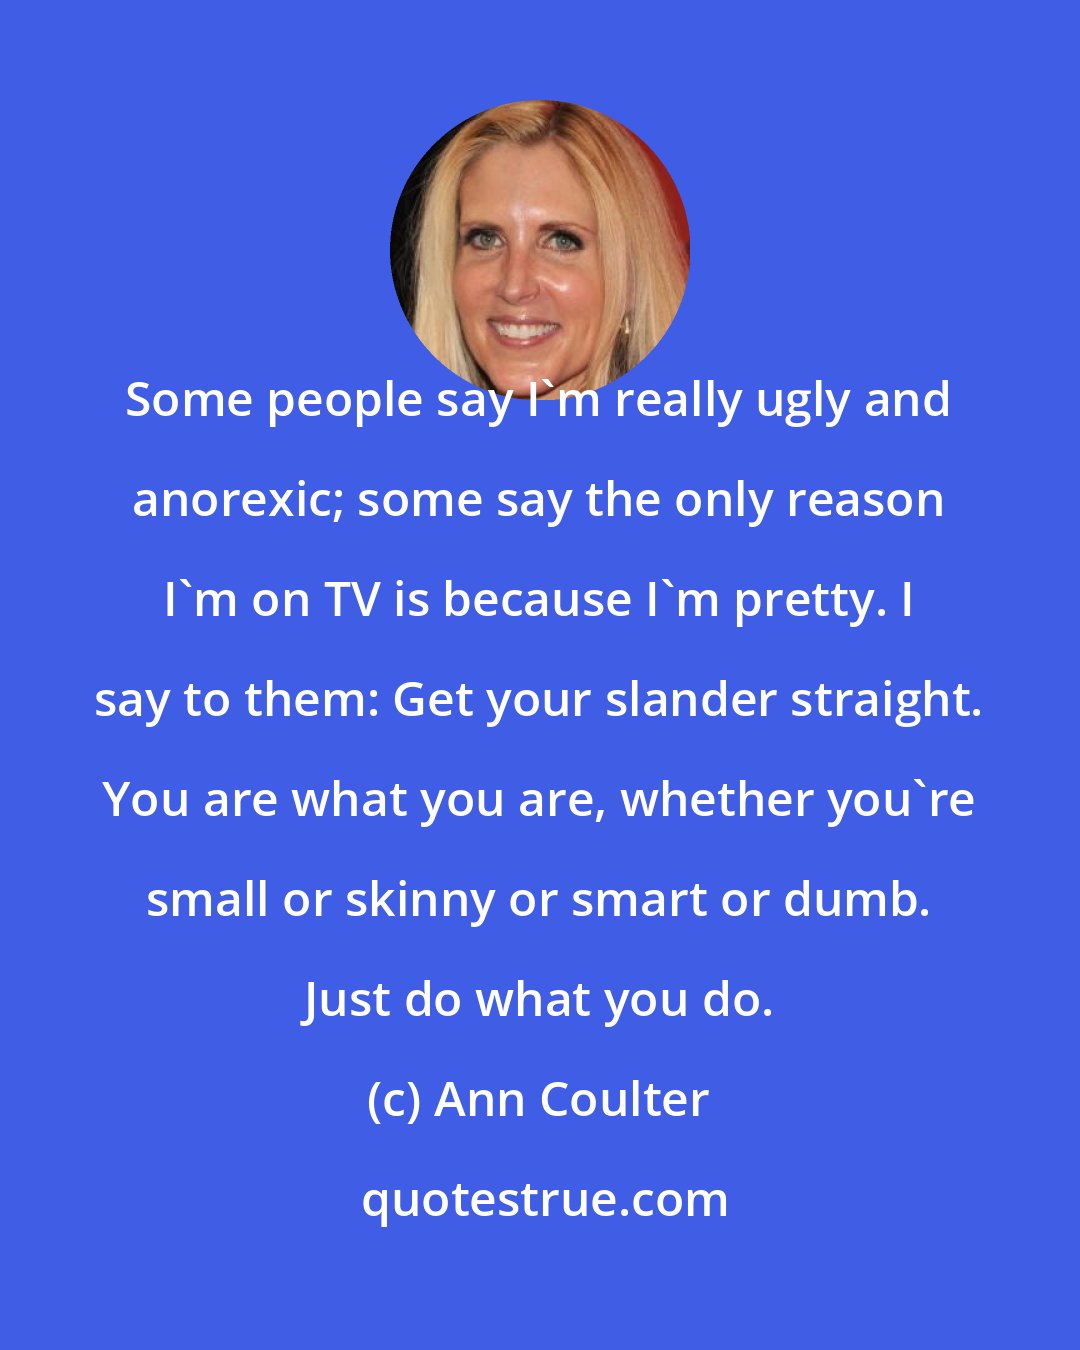 Ann Coulter: Some people say I'm really ugly and anorexic; some say the only reason I'm on TV is because I'm pretty. I say to them: Get your slander straight. You are what you are, whether you're small or skinny or smart or dumb. Just do what you do.